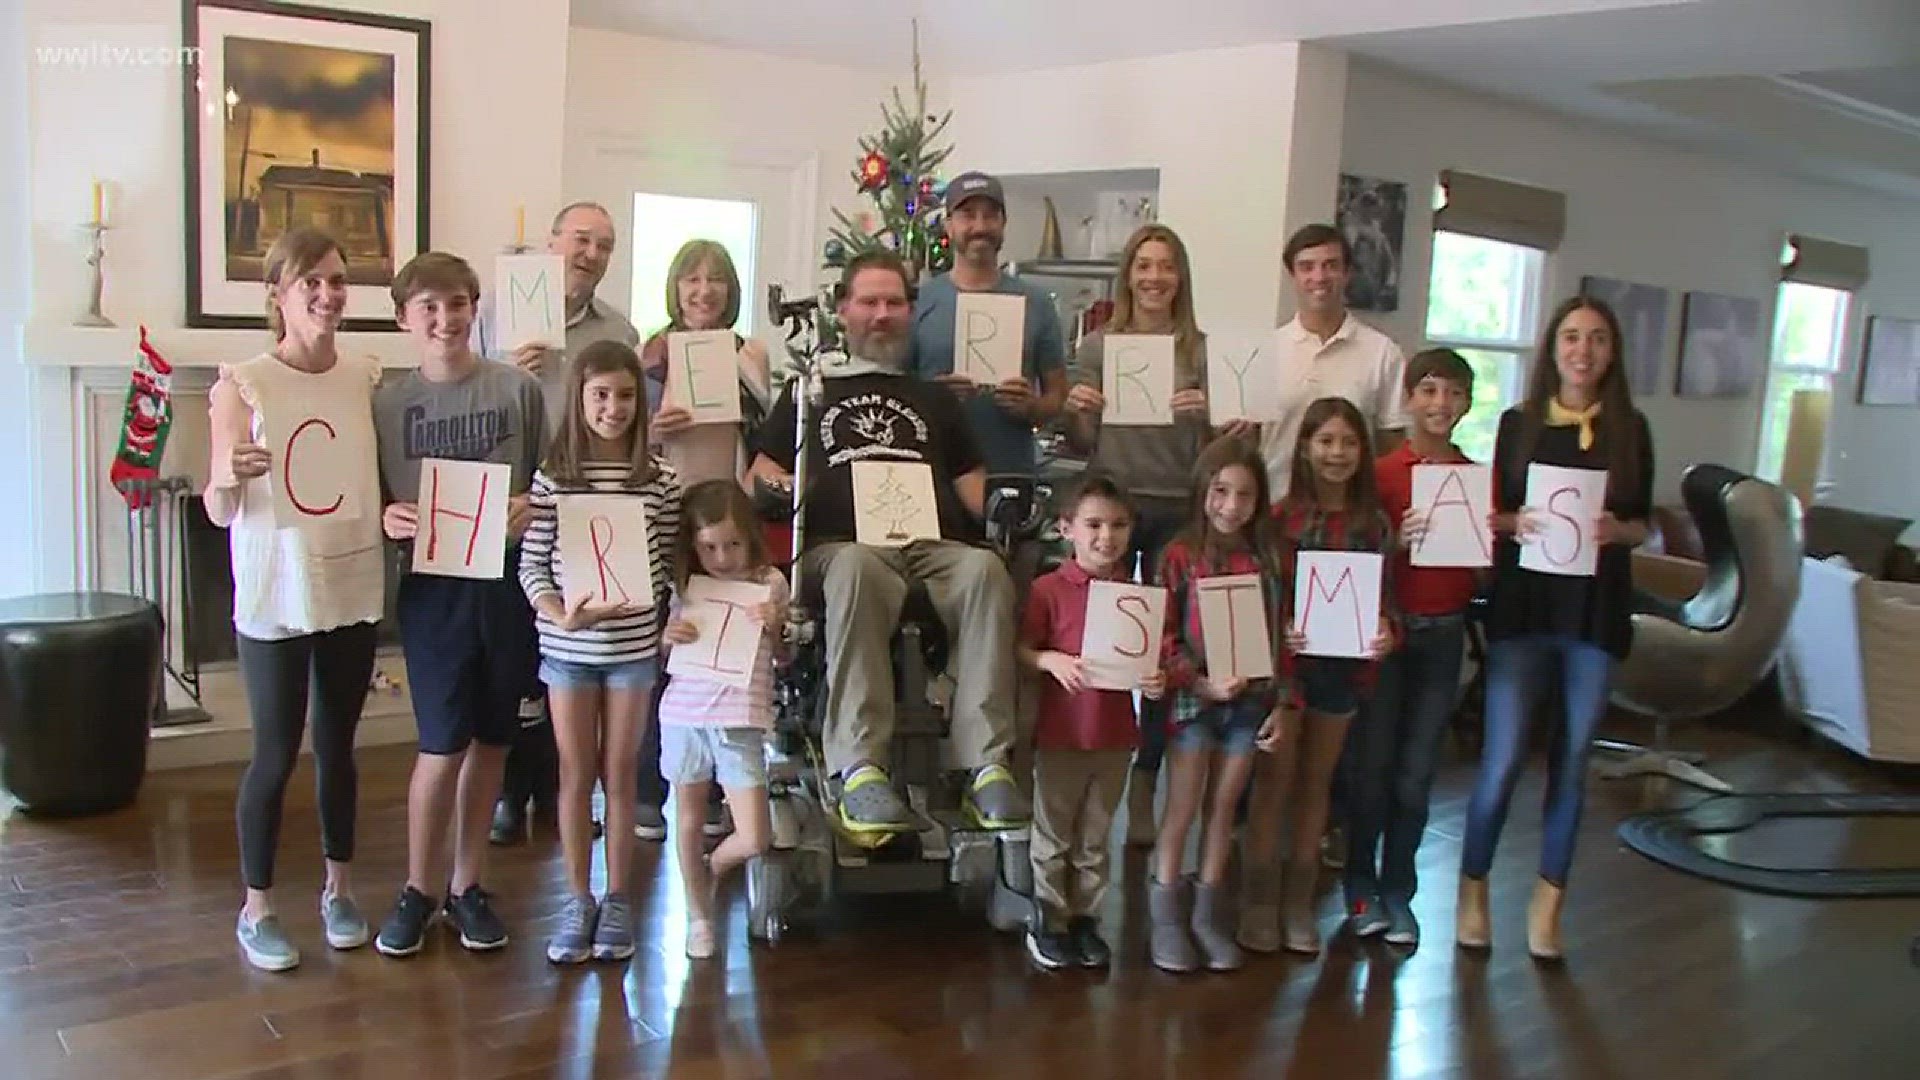 Steve Gleason continues to inspire New Orleans and his home city of Spokane.